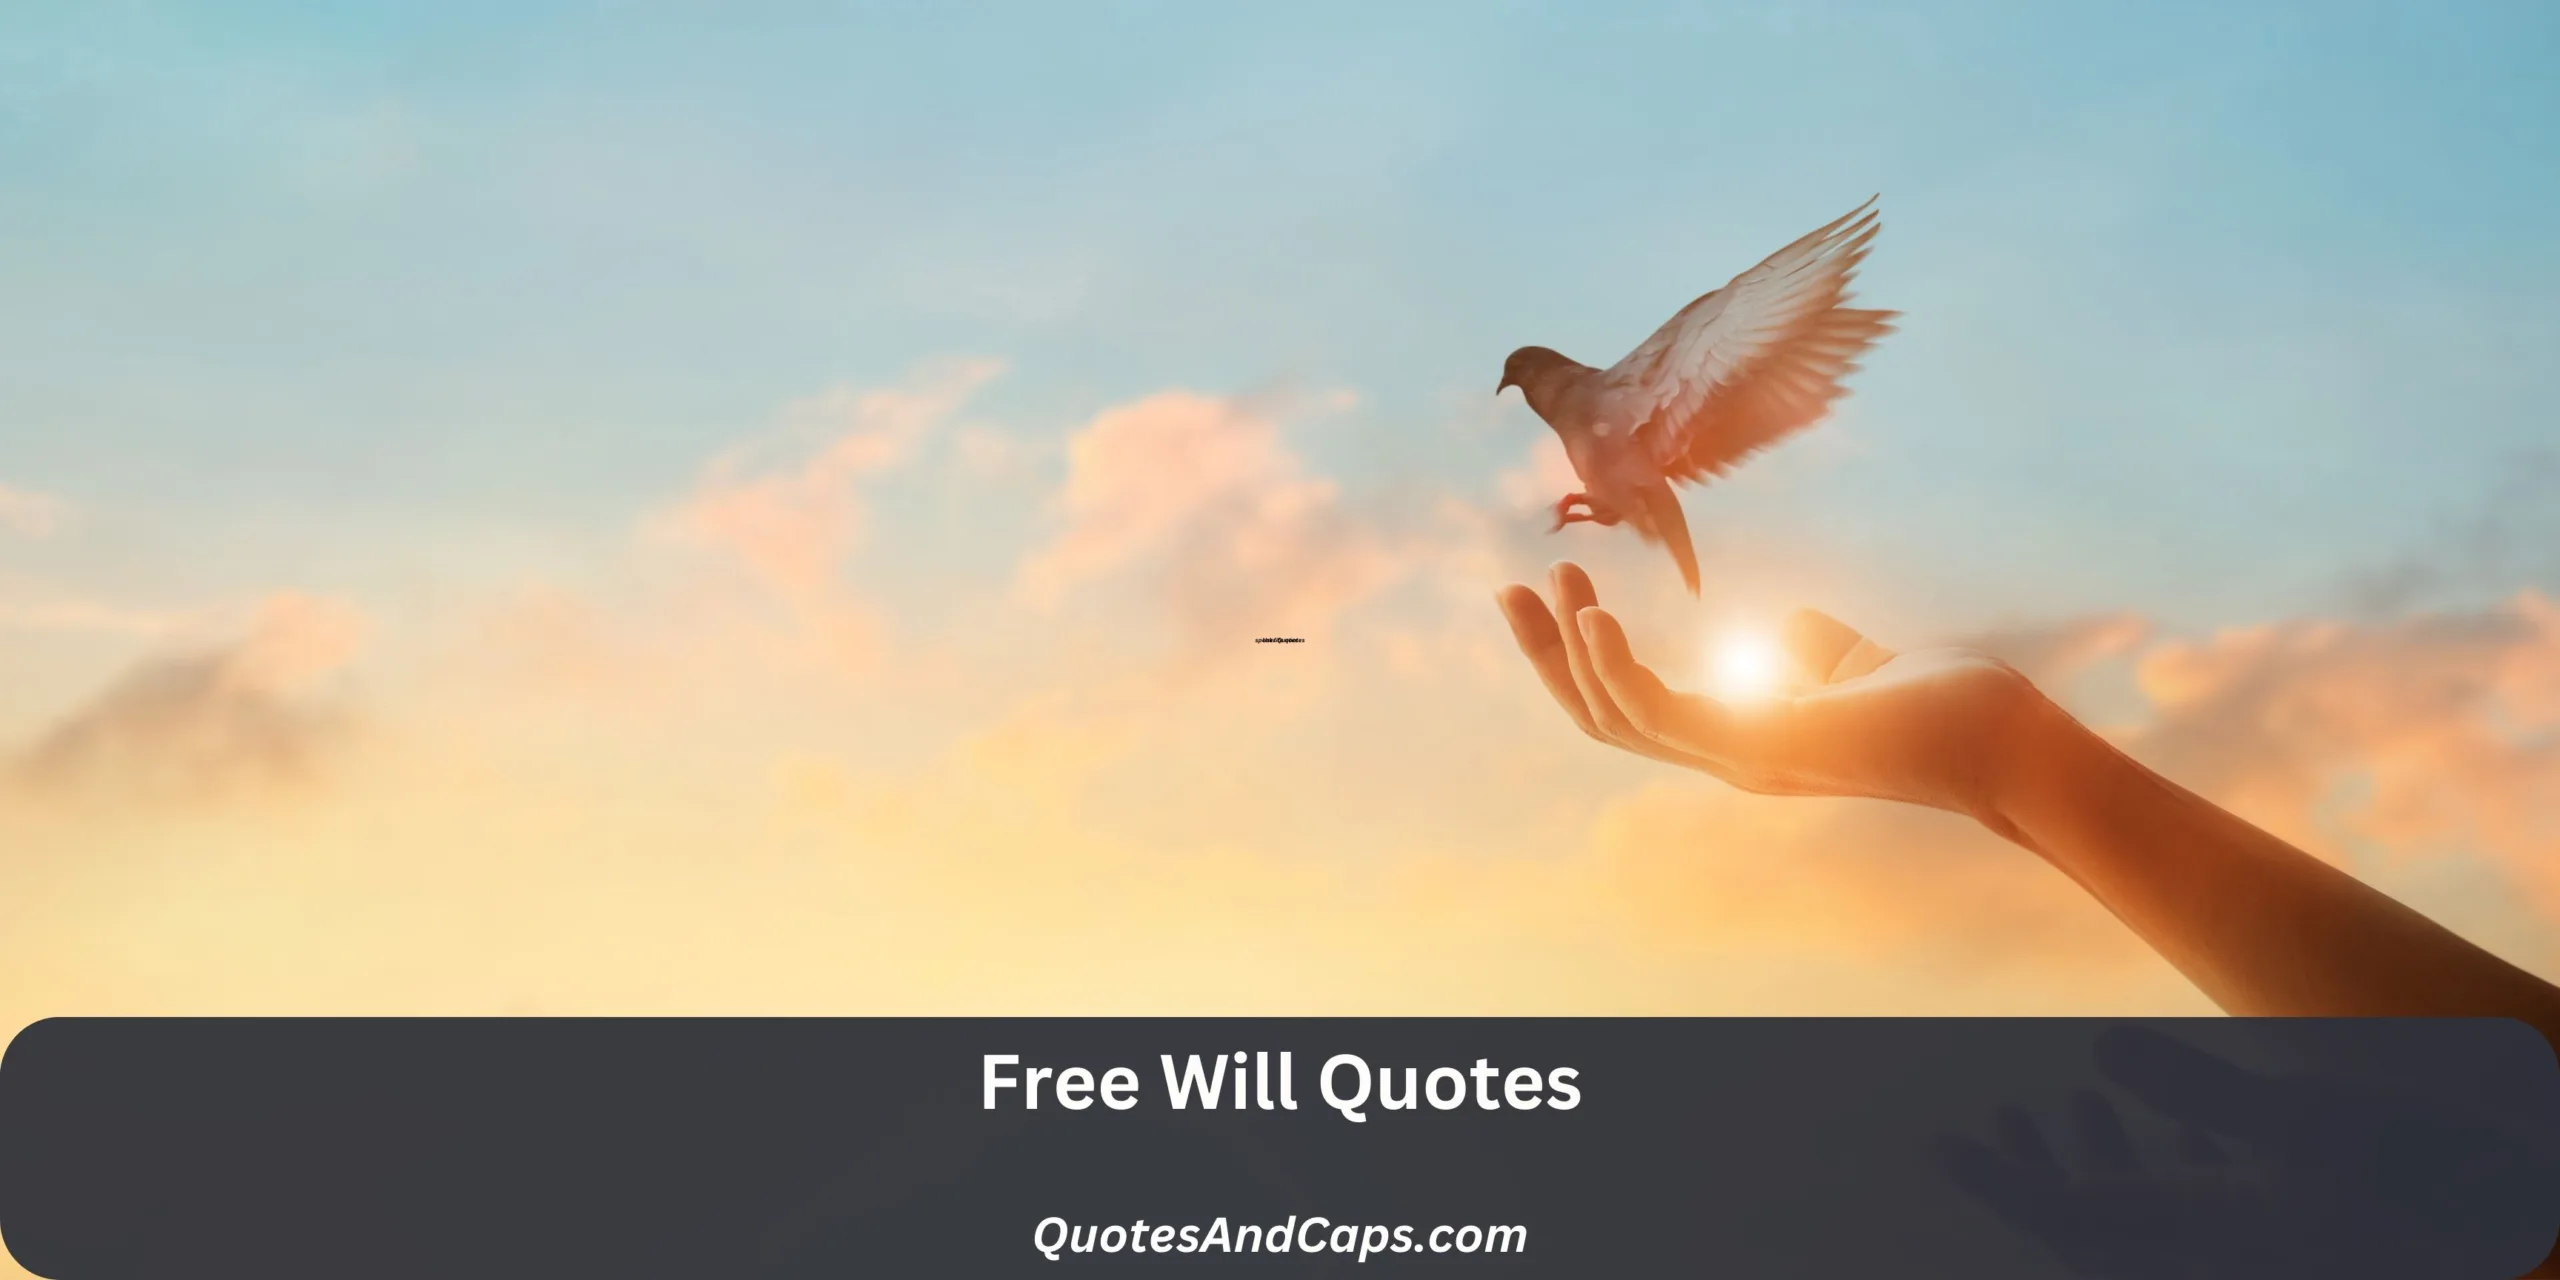 Free Will Quotes